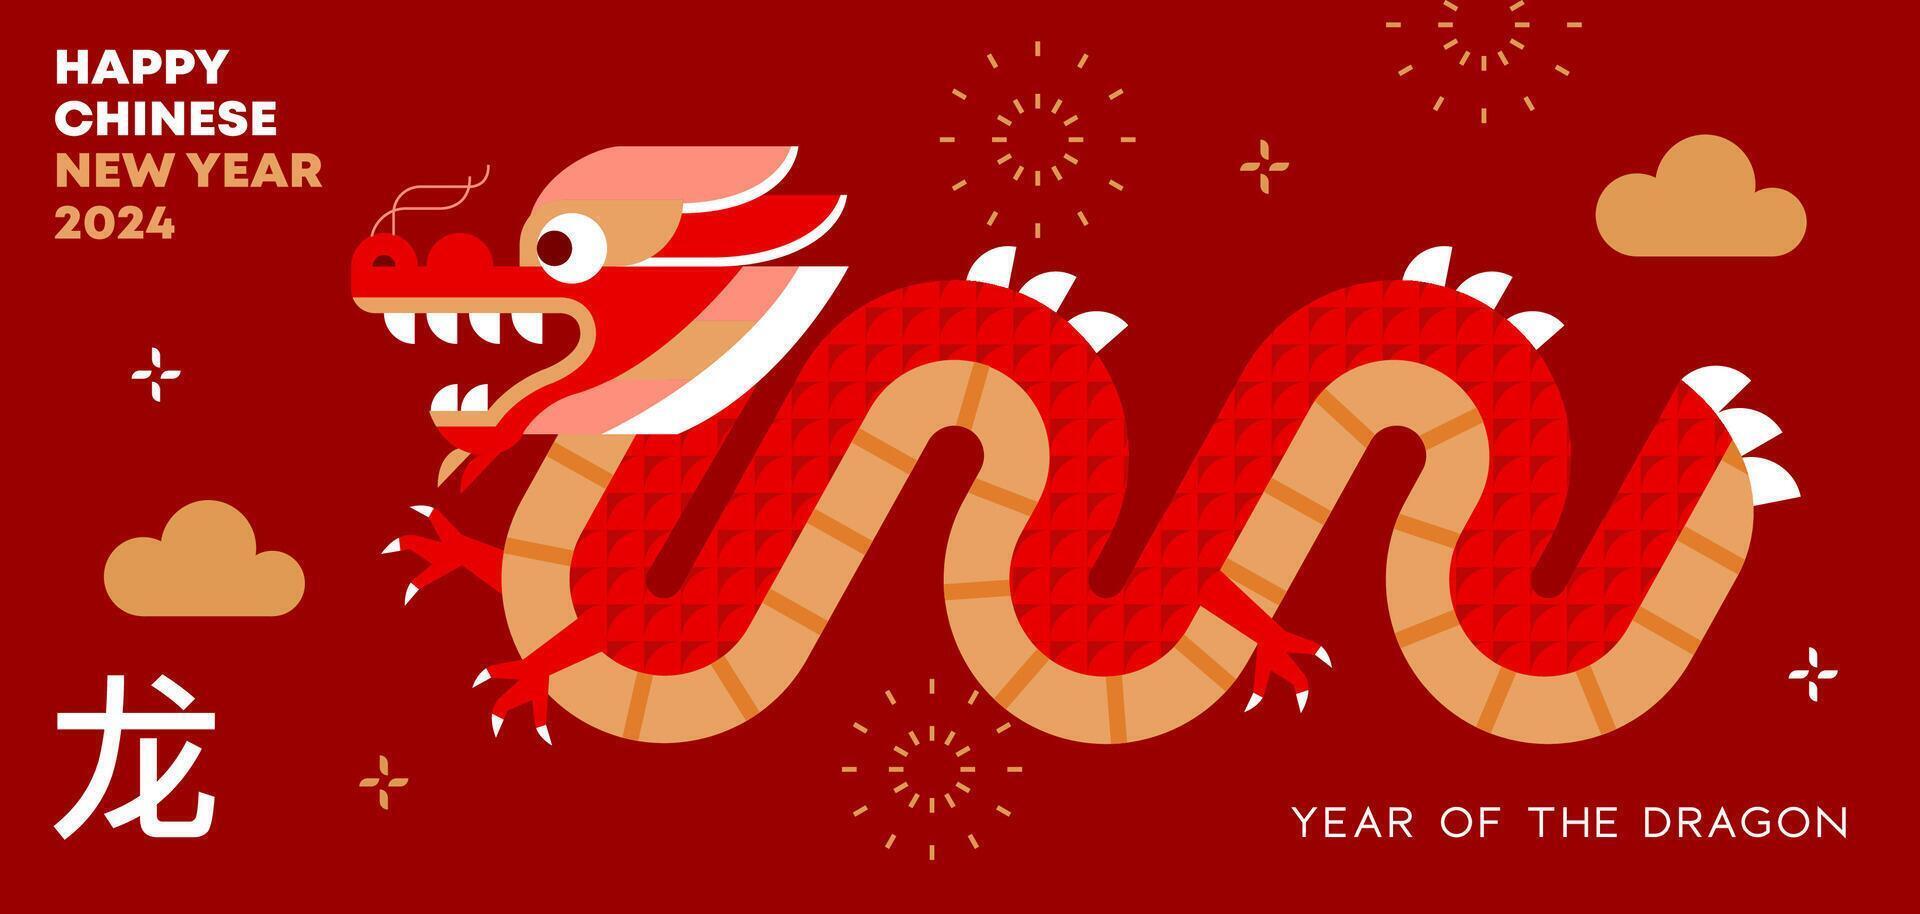 2024 Chinese New Year - Year of dragon modern art design. Branding covers, cards, posters, banners. Chinese zodiac dragon symbol. Minimal trendy design templates with typography. vector